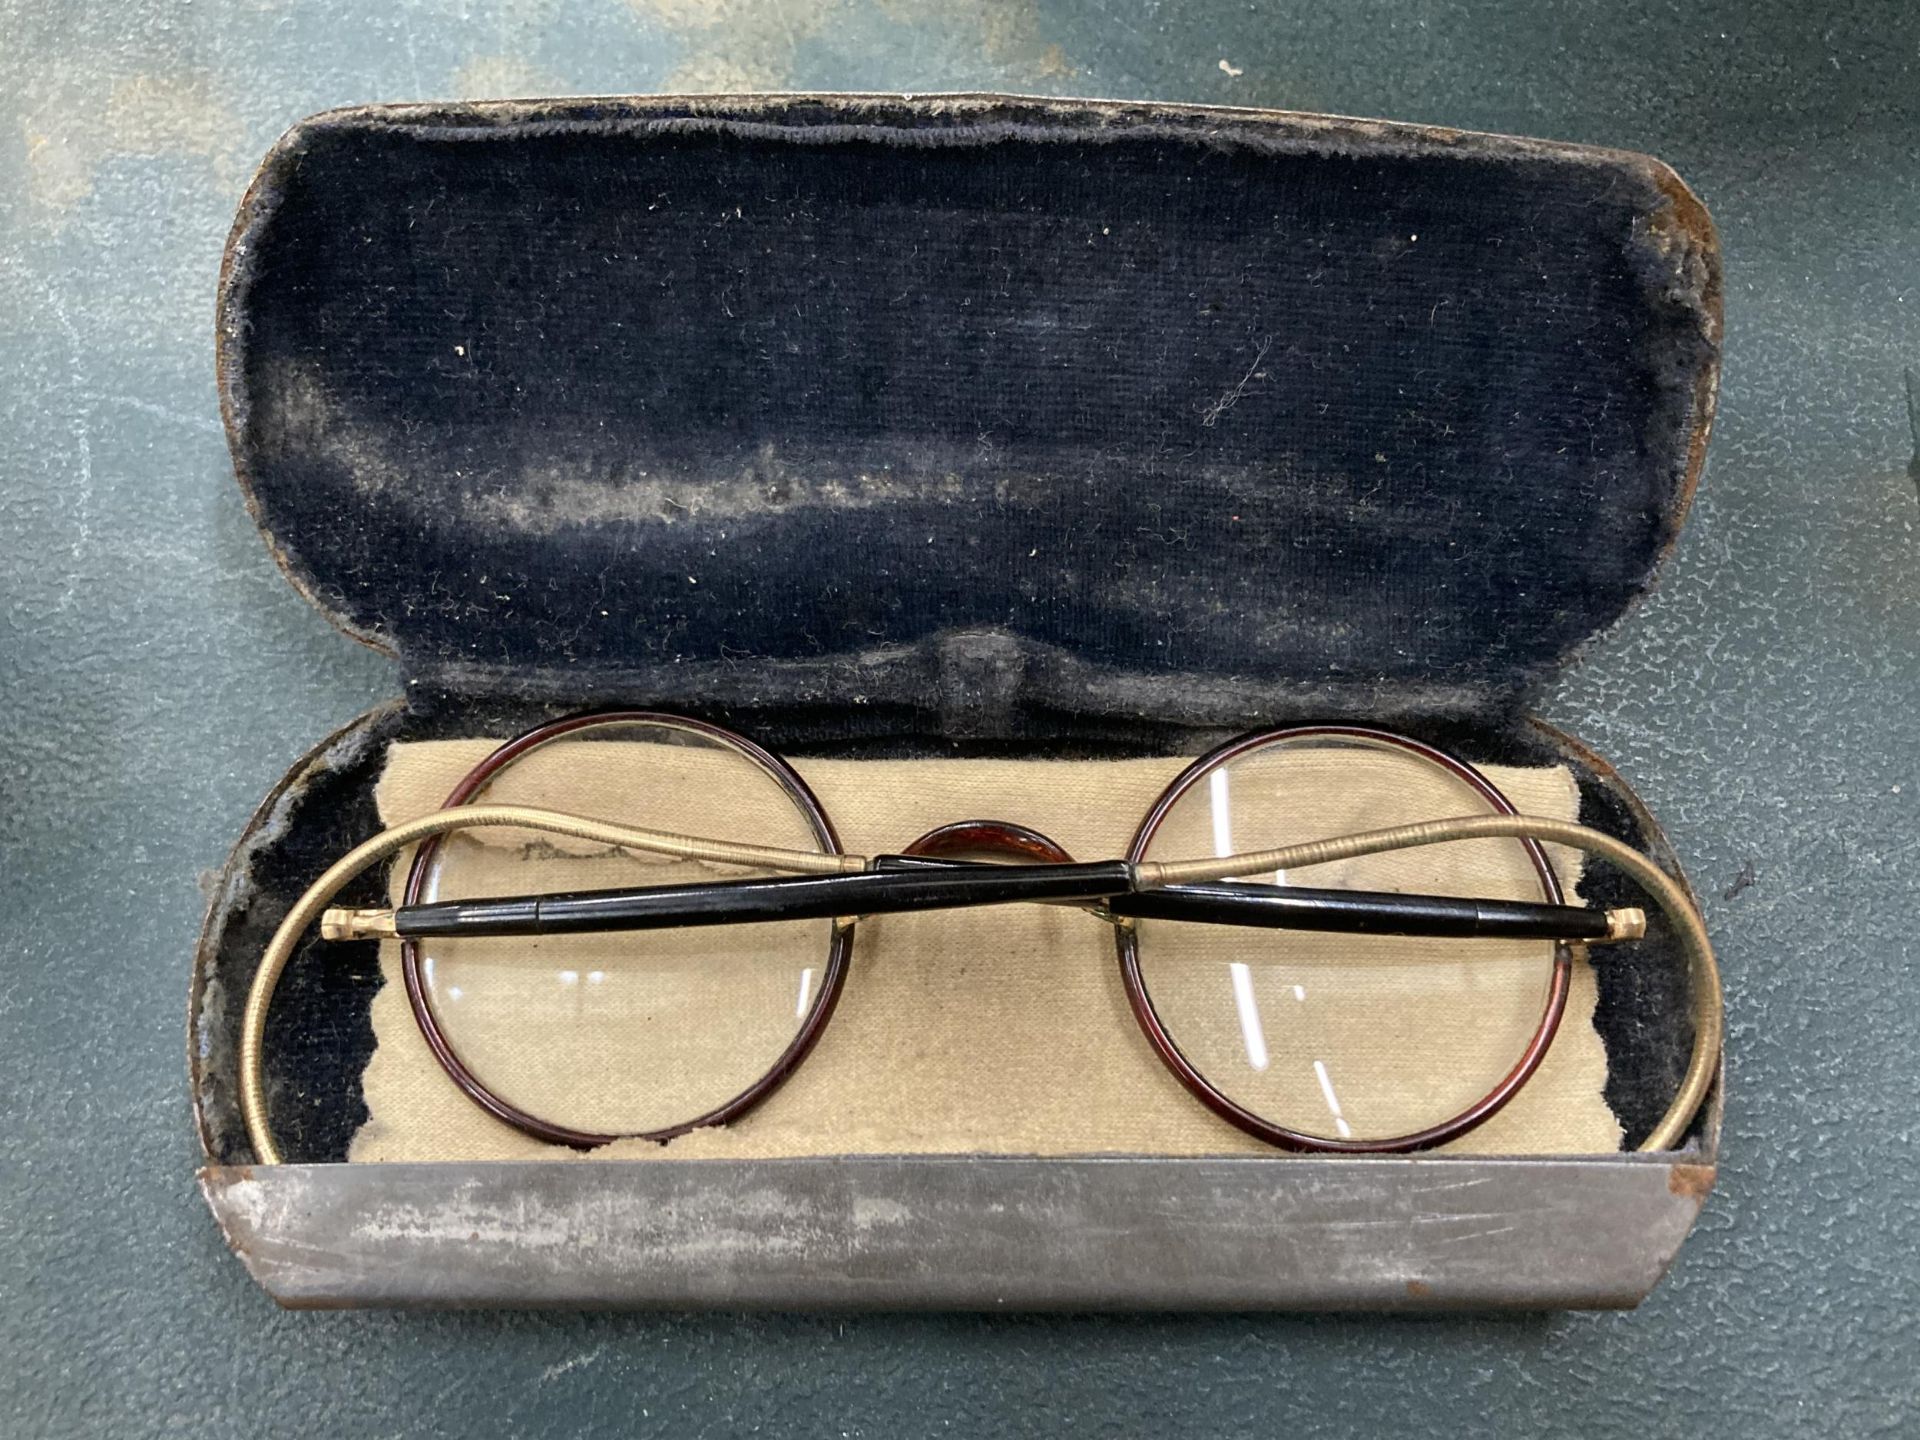 A PAIR OF VICTORIAN TORTOISE SHELL GLASSES IN A WHITE METAL CASE